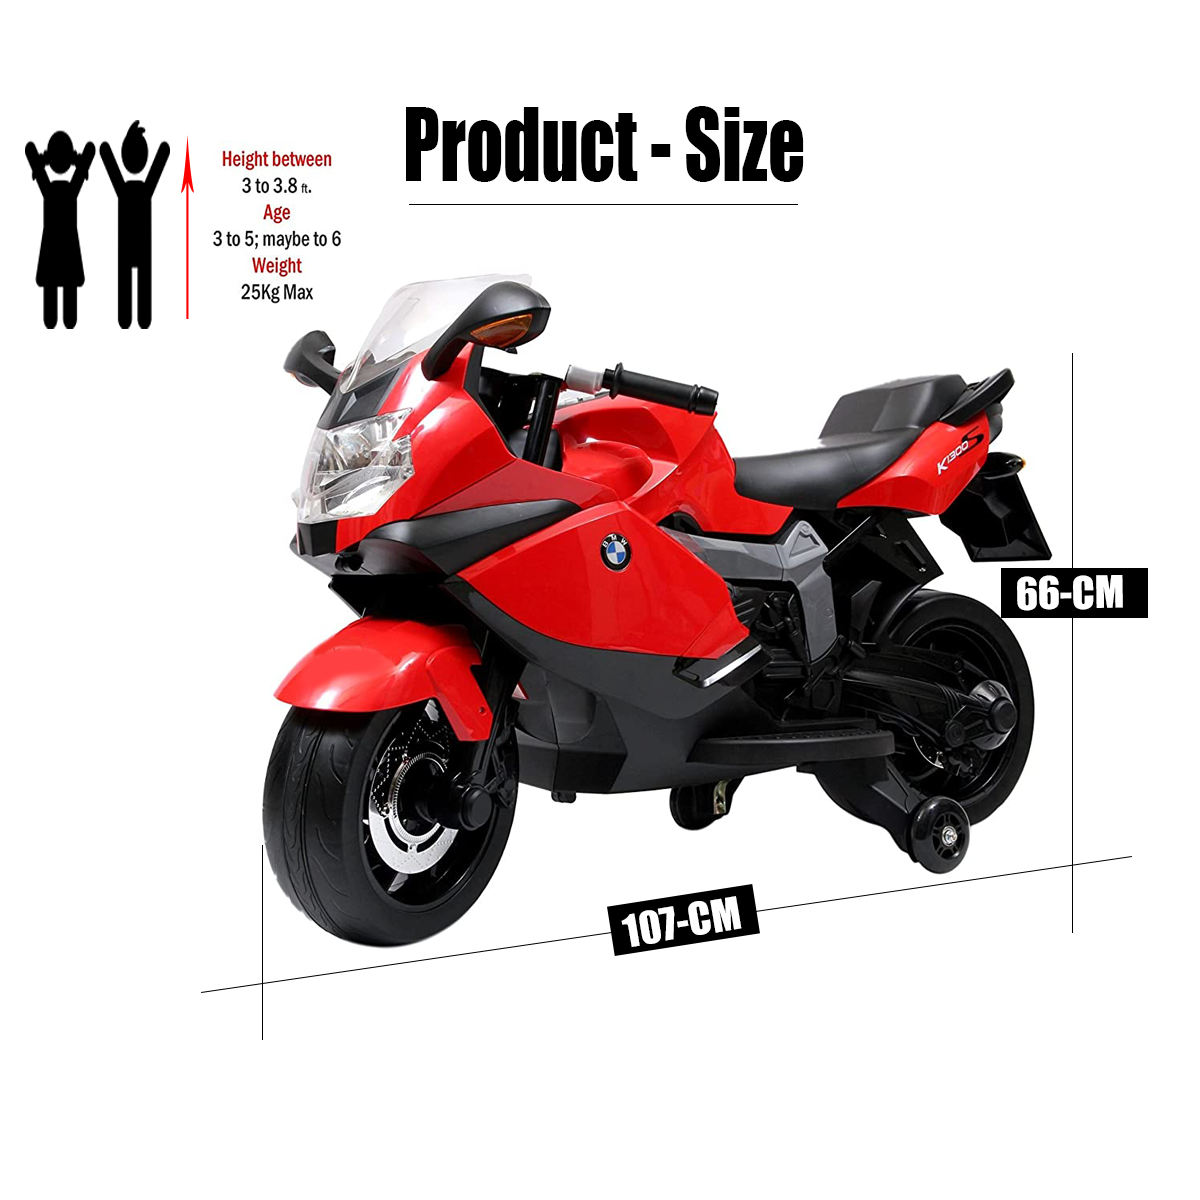 Officially licensed | kids bmw bike | model k1300s toy bike | Ride on | bmw toy motorcycle